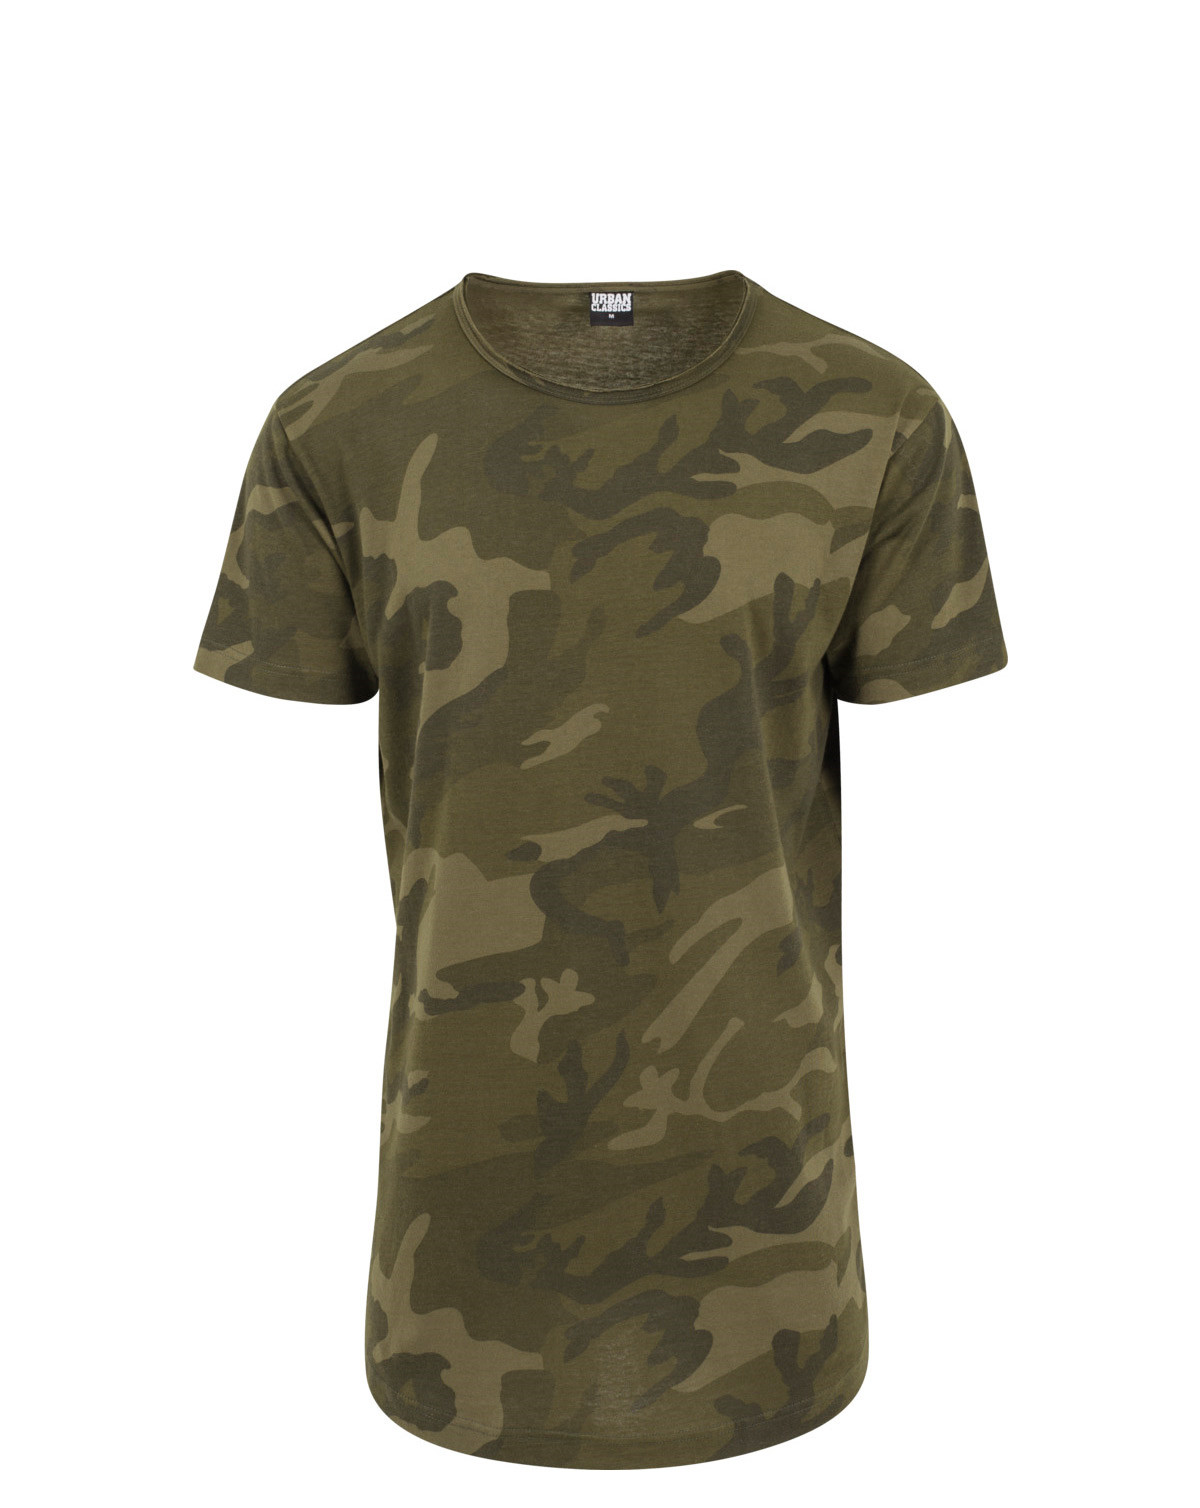 11: Urban Classics Lang Camouflage T-shirt (Oliven Camo, S)